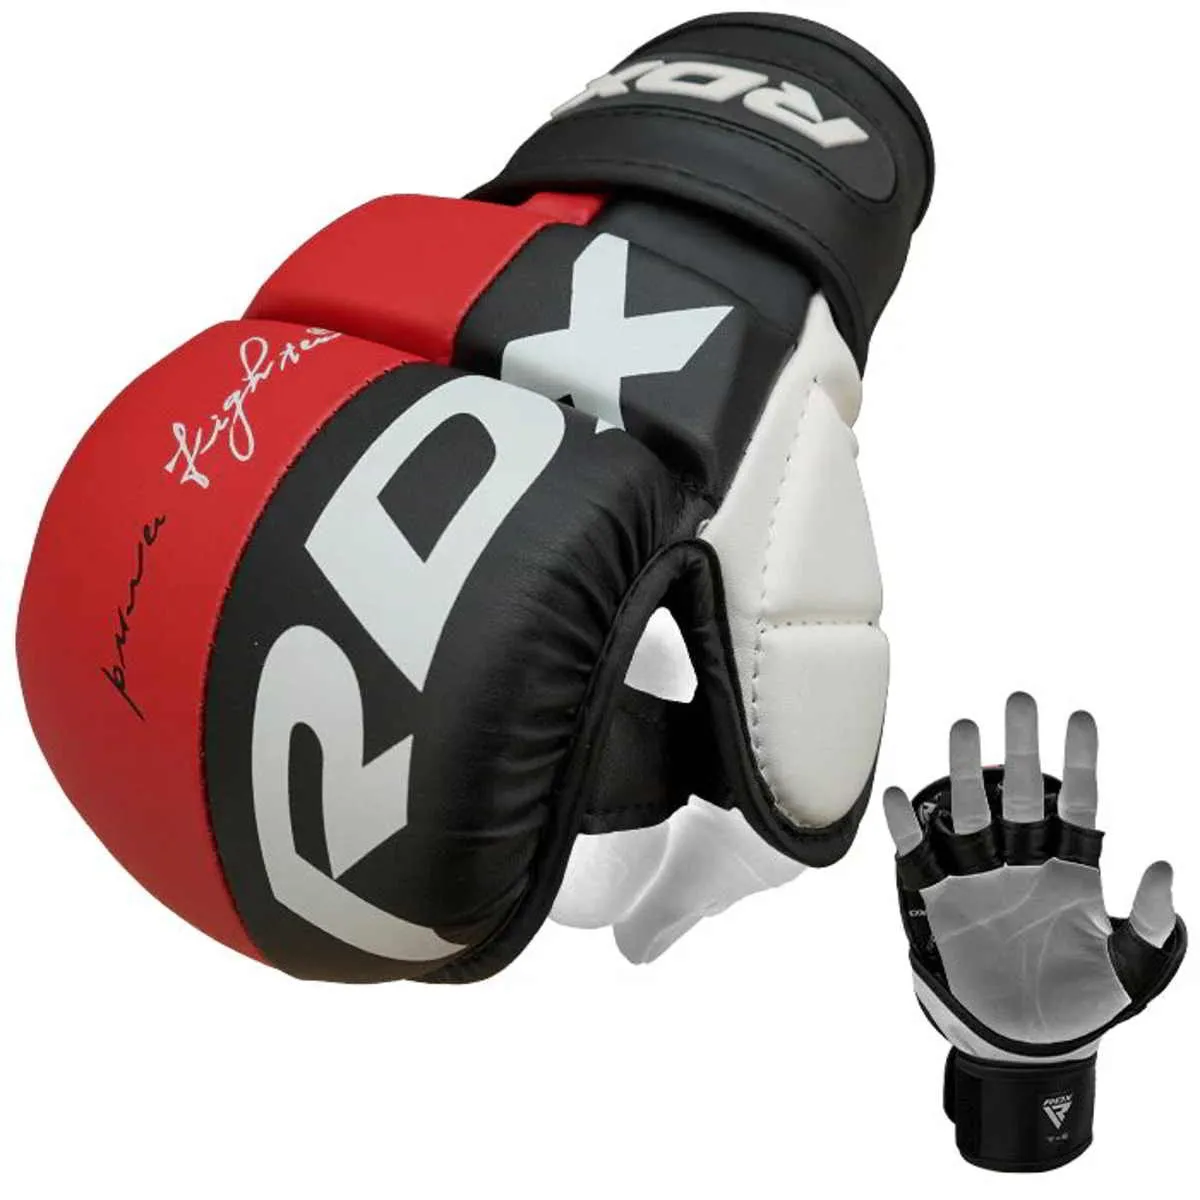 Gants MMA Sparring cuir synthétique rouge 7oz RDX T6